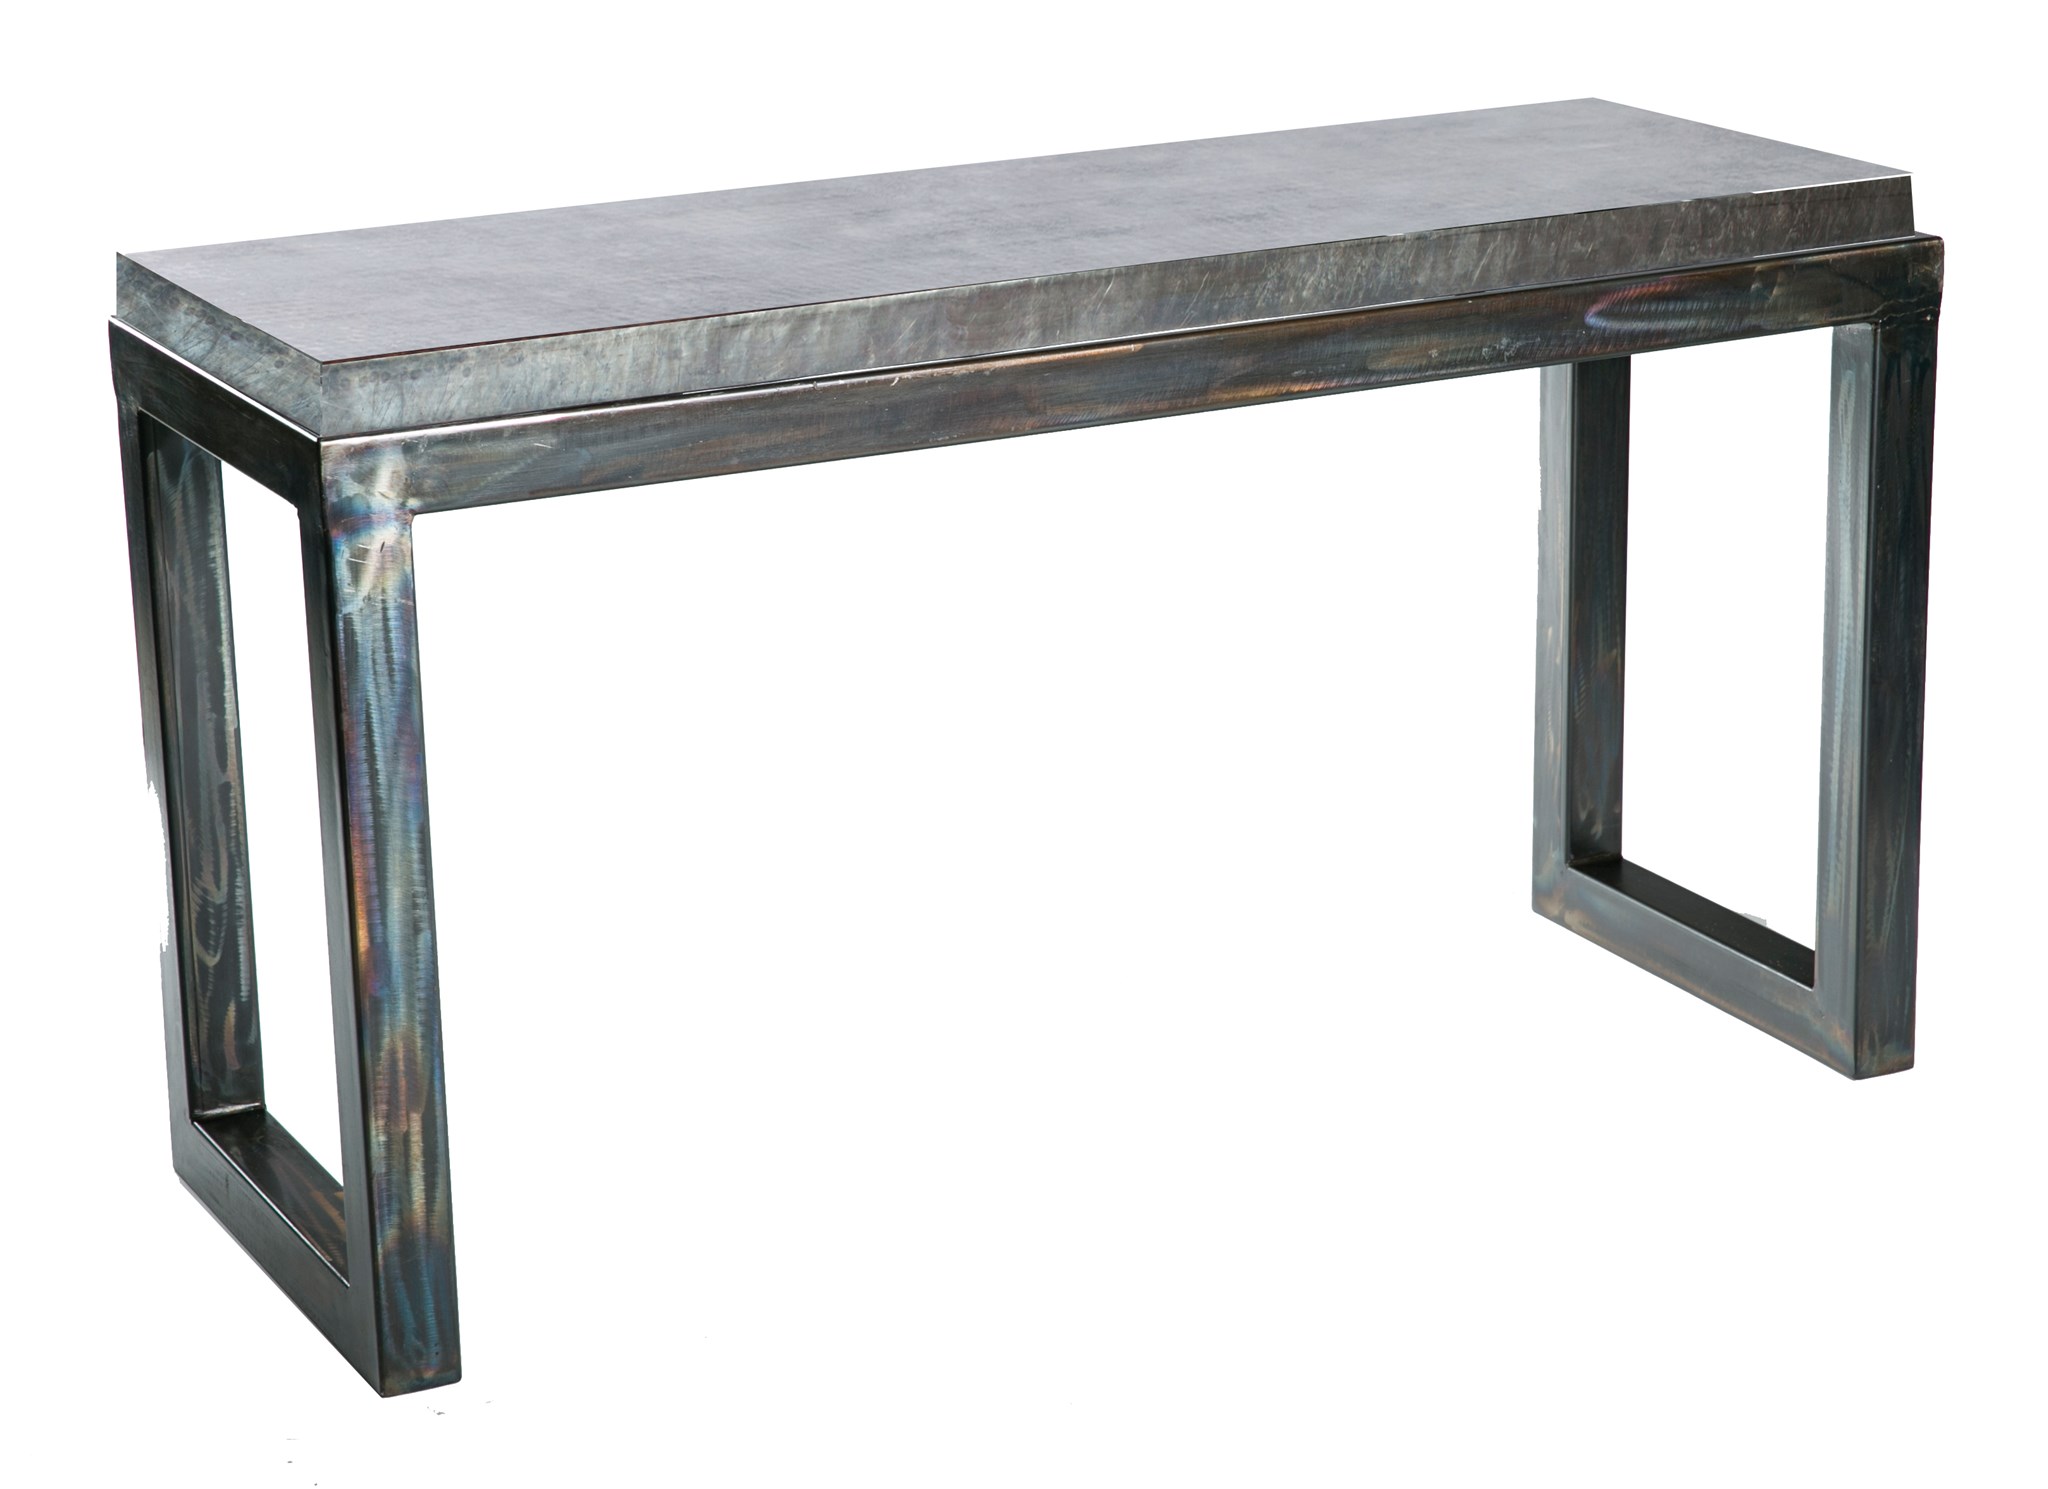 Chester Console Table With Hammered Zinc Top Boulevard Urban Living